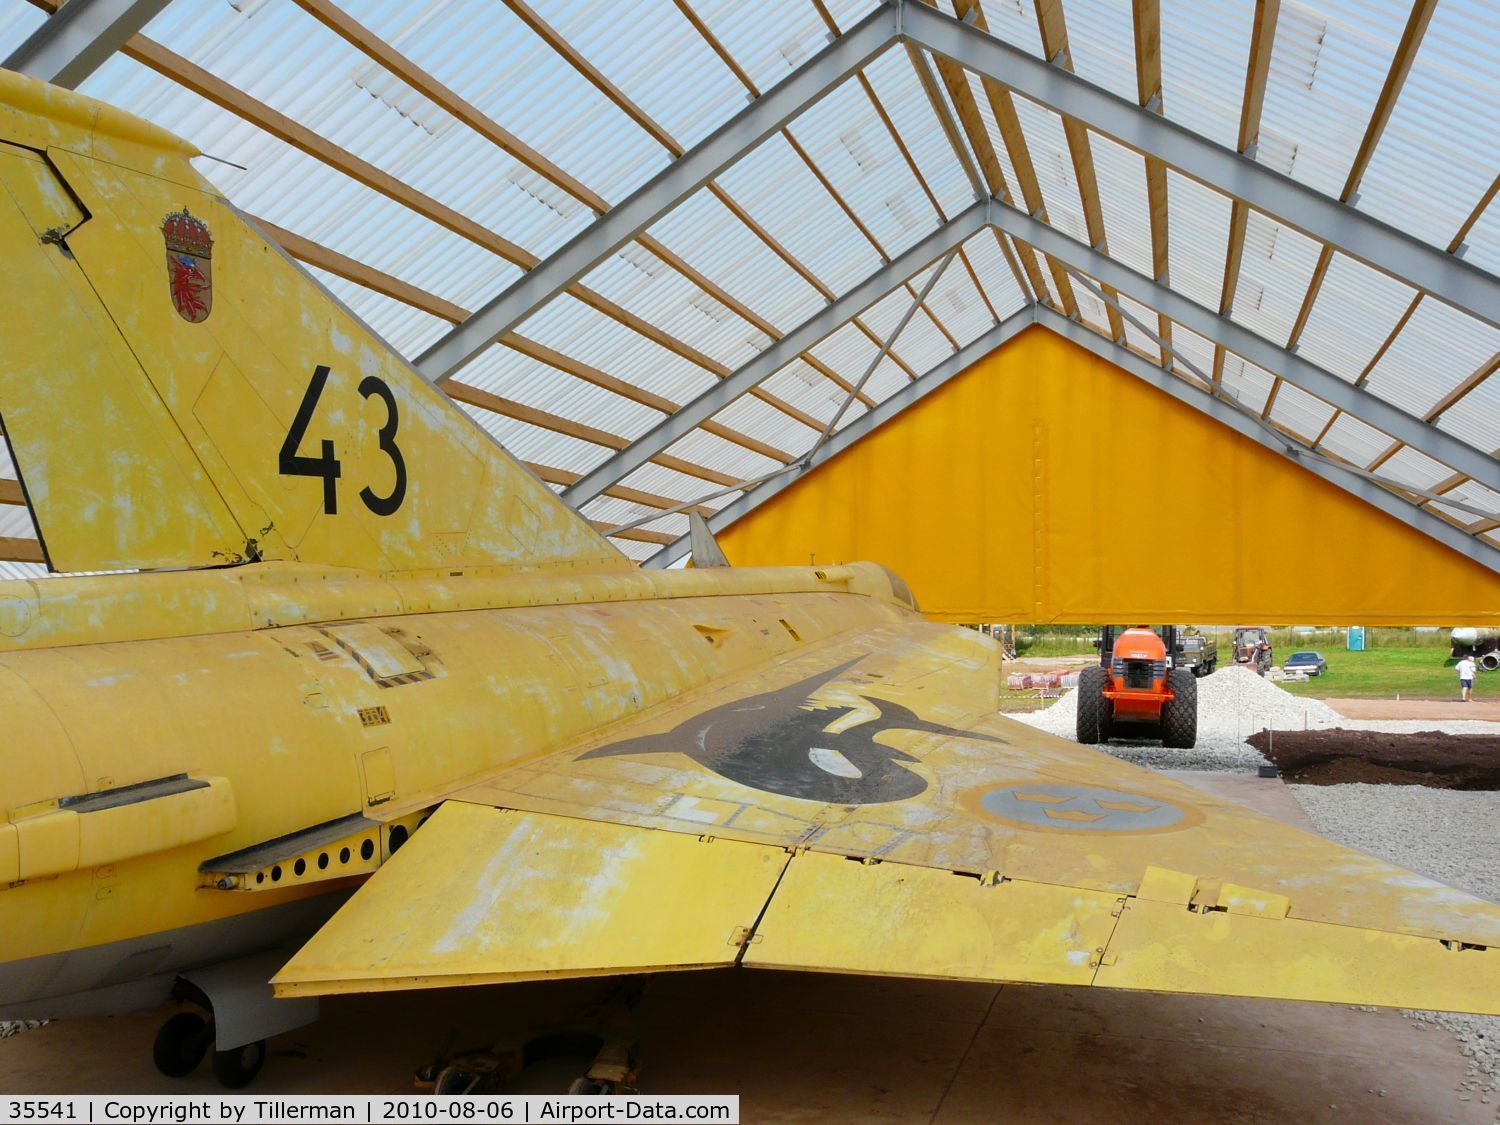 35541, Saab J-35J Draken C/N 35-541, Since early 2010 this aircraft is on display with the Estonian Aviation Museum in Lange (near Tartu), Estonia.